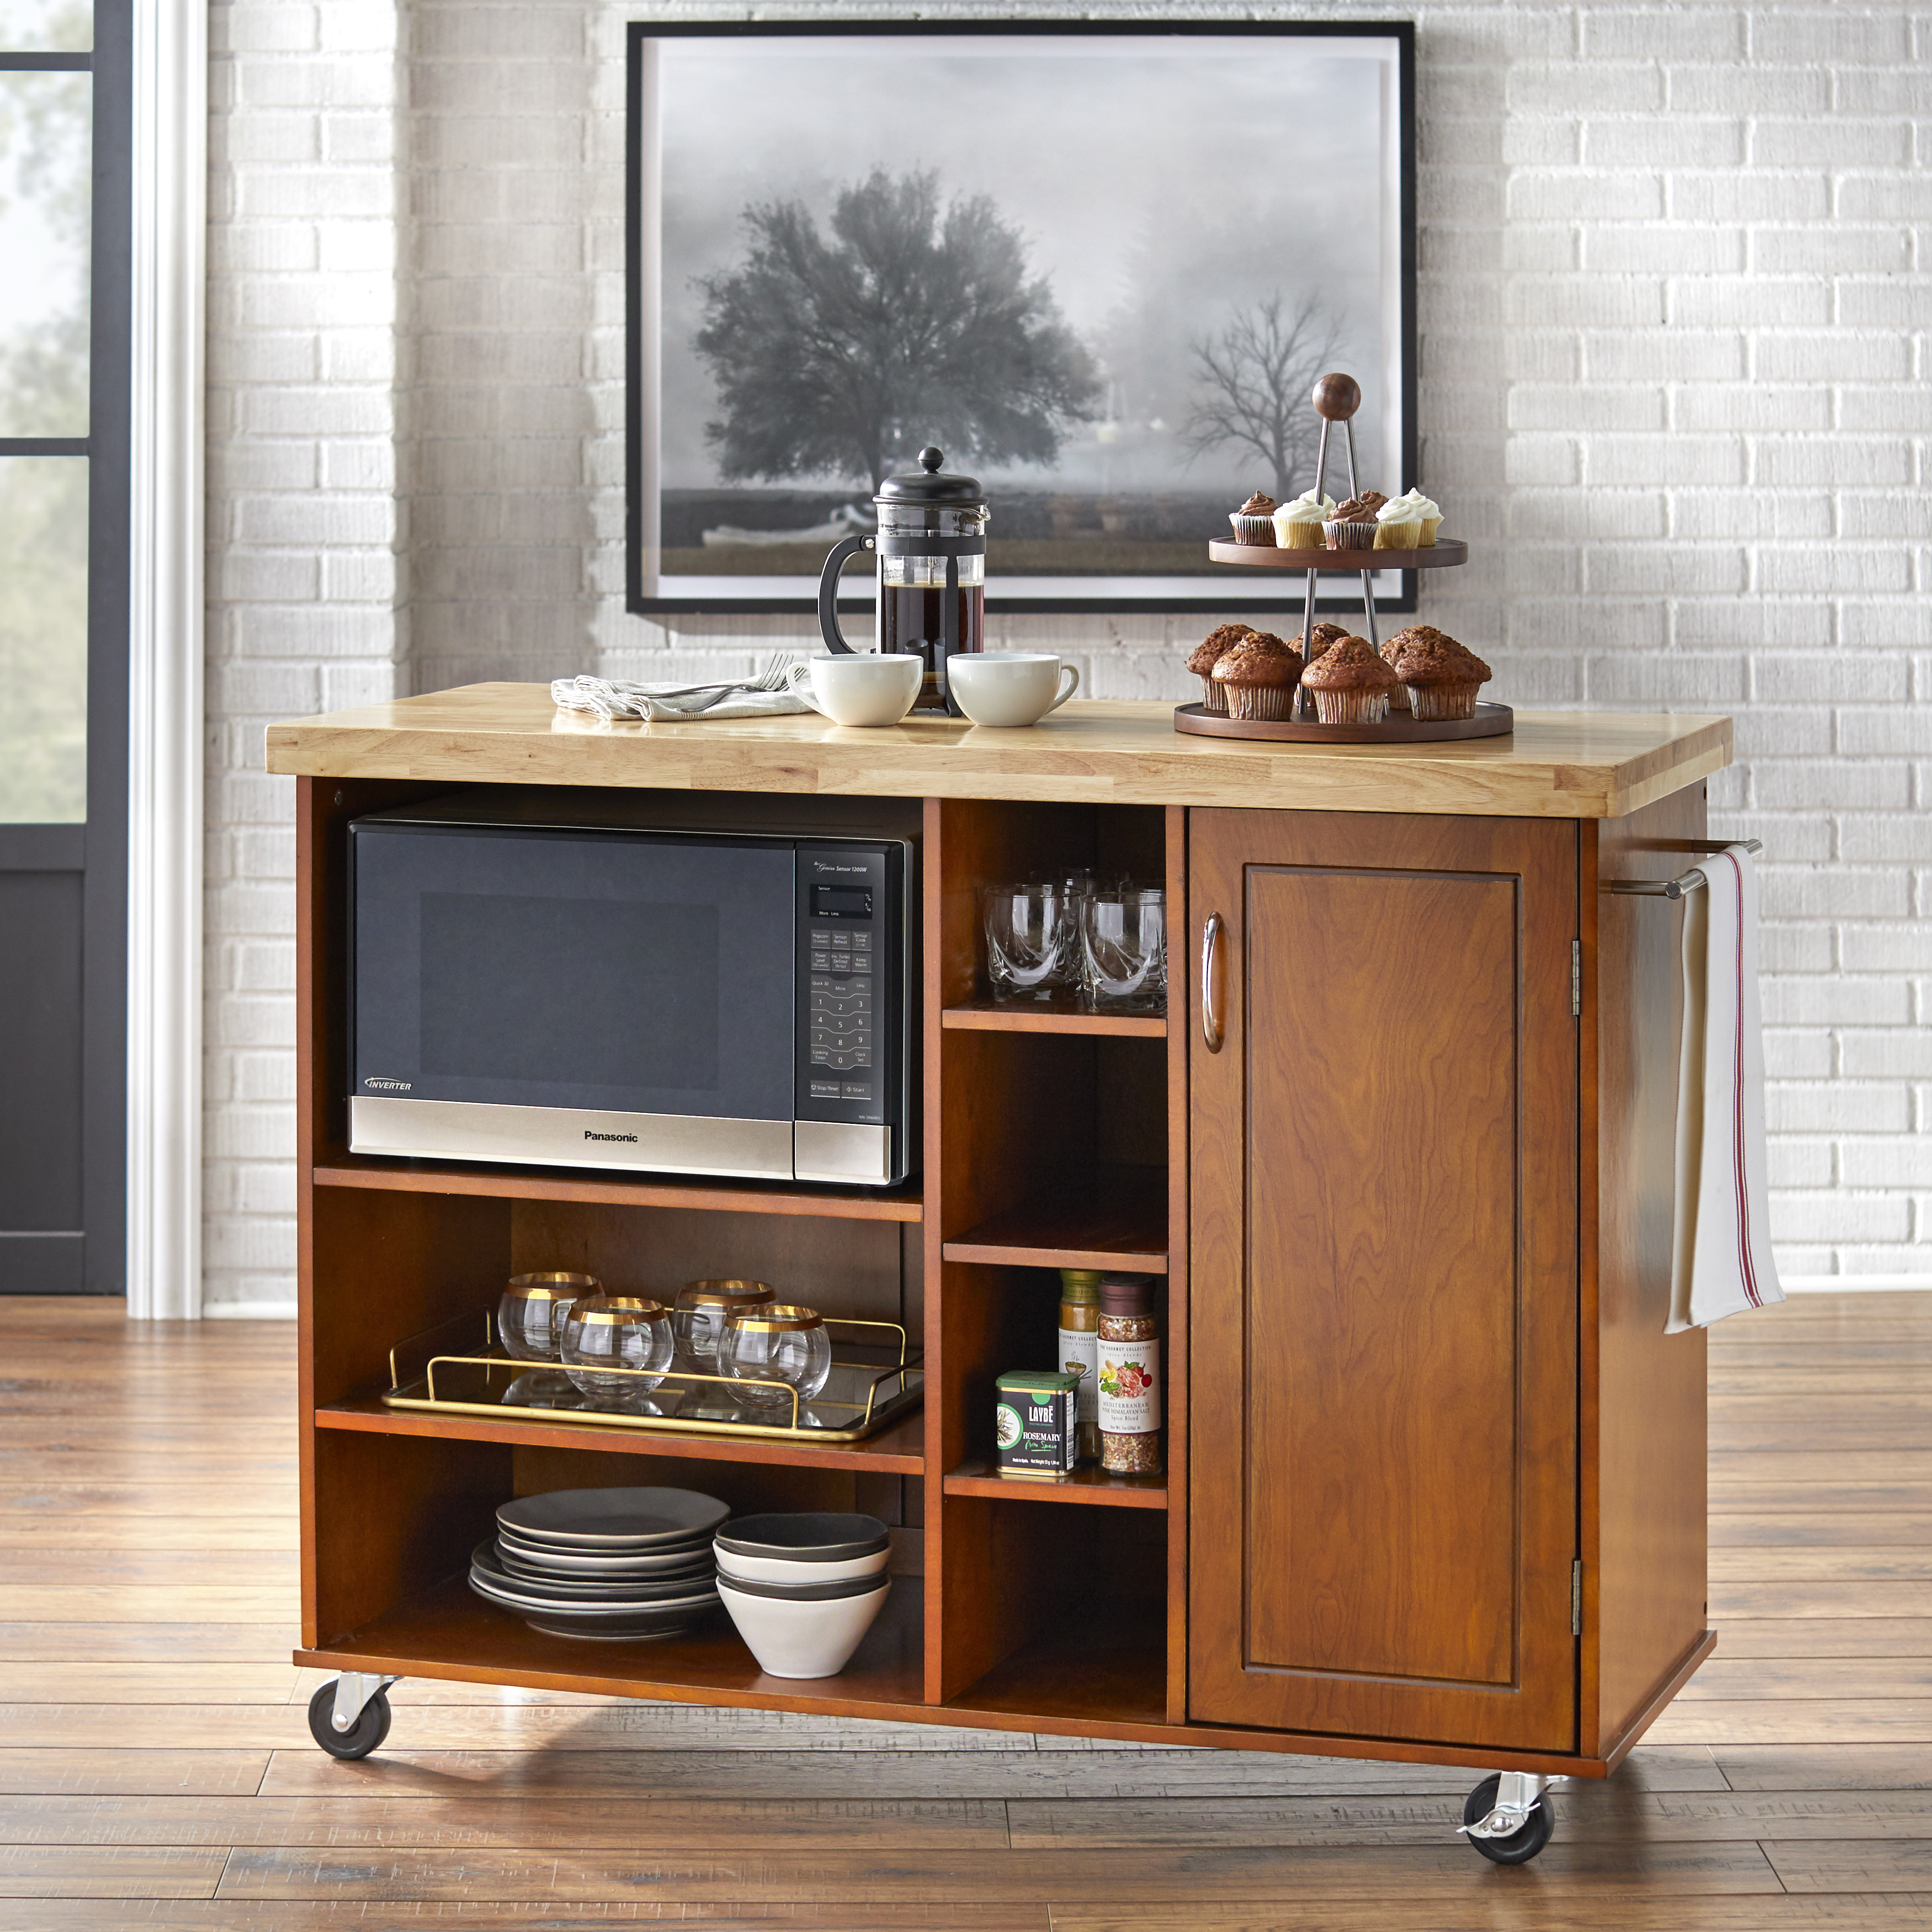 TMS Galvin Butcher Block Rolling Kitchen Cart with Microwave Cabinet, Shelves, and Towel Rack, Walnut - image 1 of 7